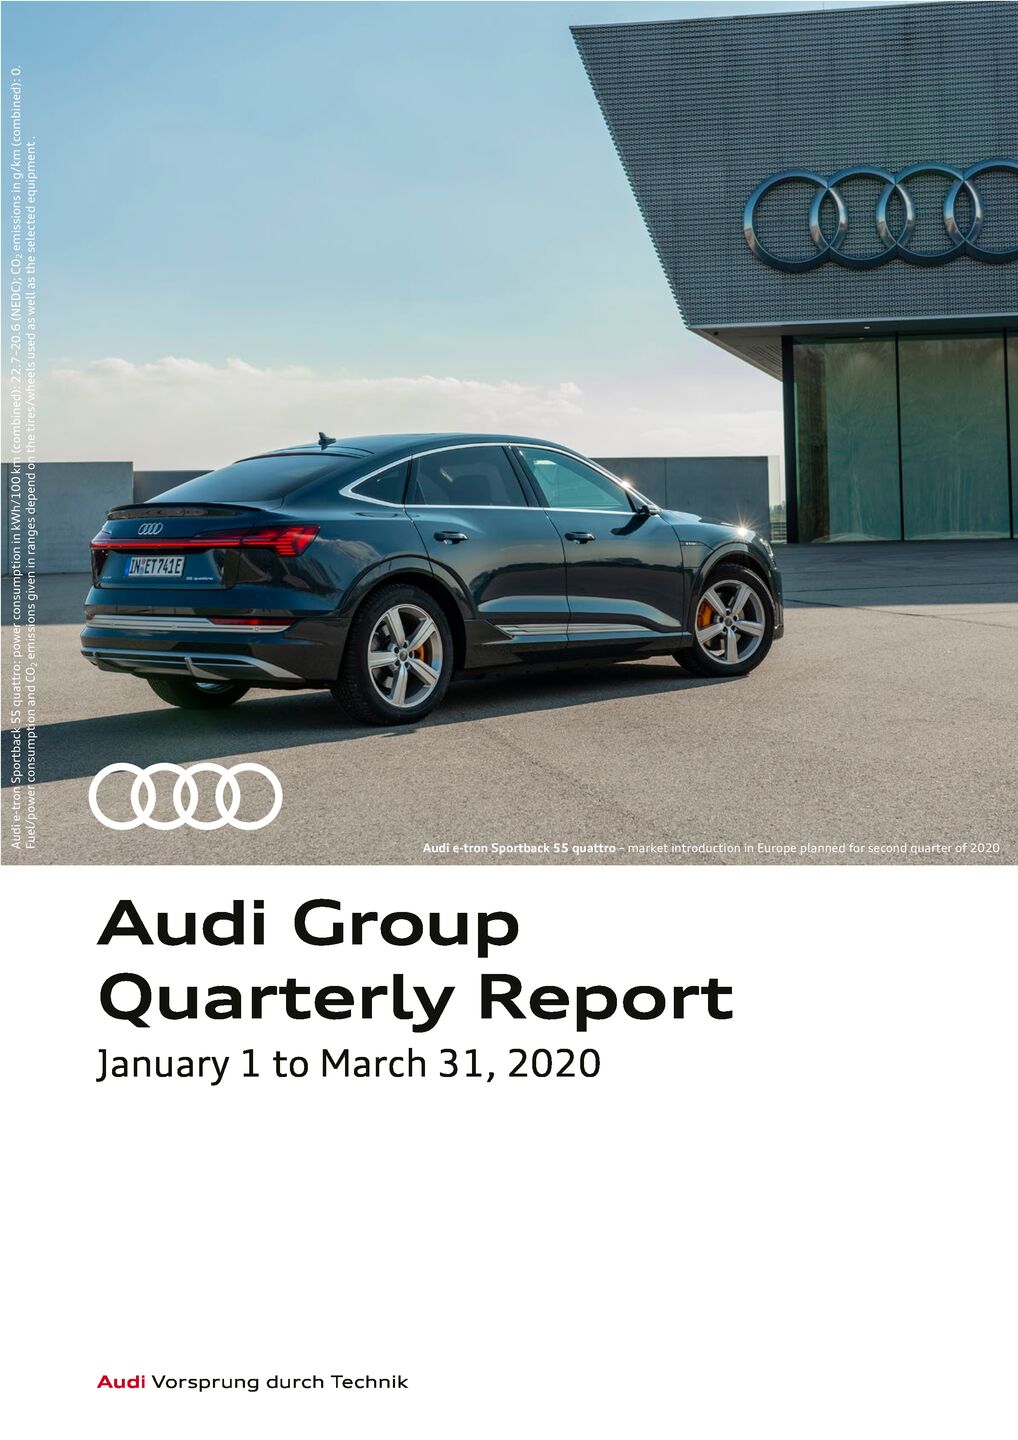 Audi Group Quarterly Report, January 1 to March 31, 2020